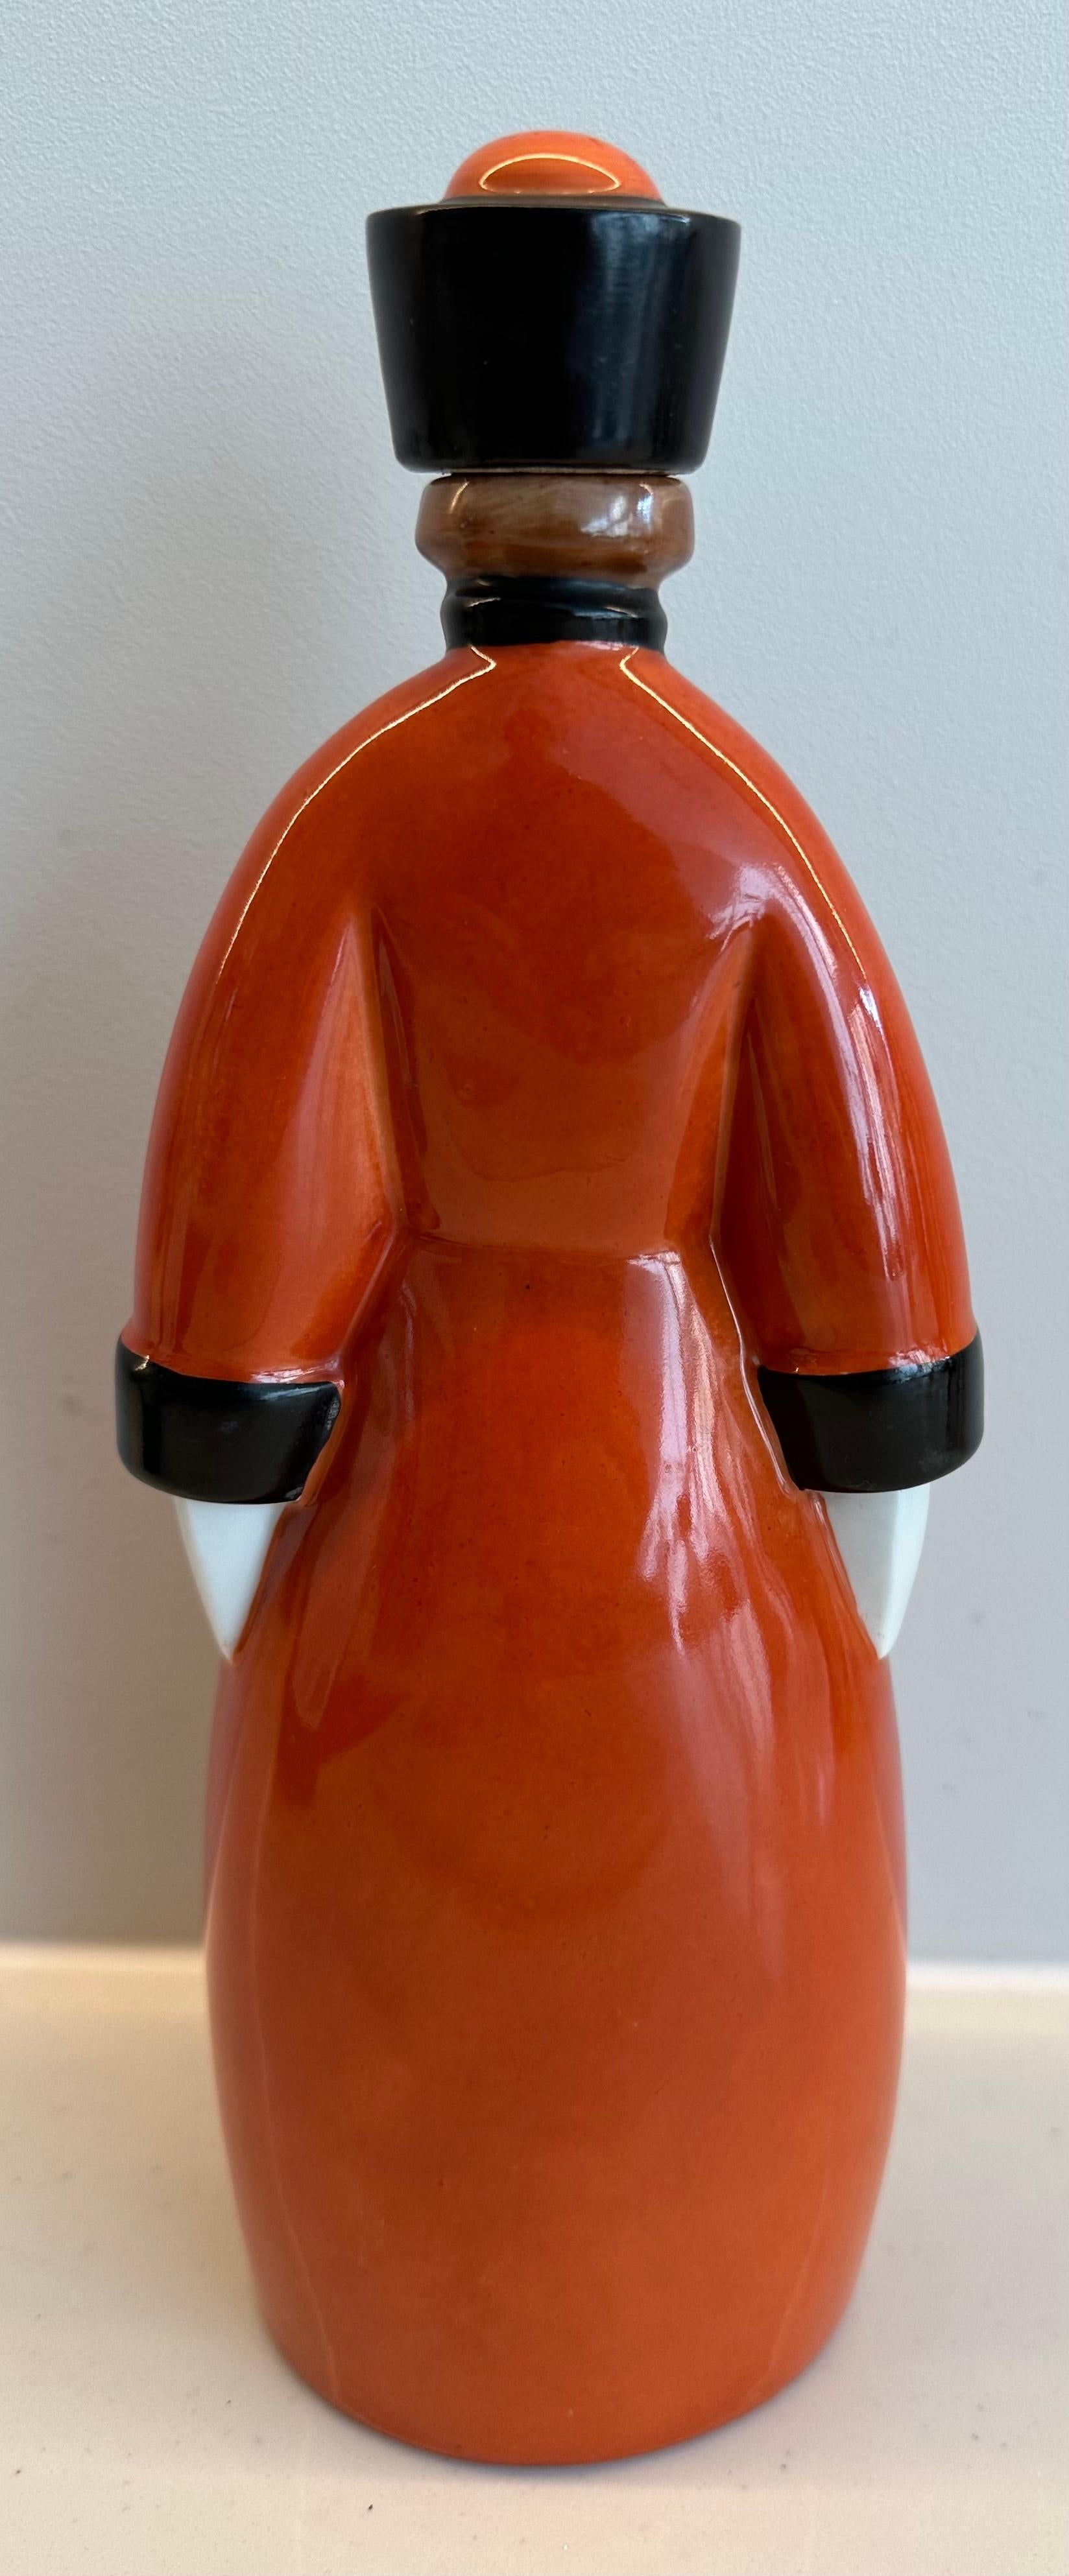 Art Deco 1930s French “Curacao” Figural Russian Soldier Flask by Robj Paris For Sale 1